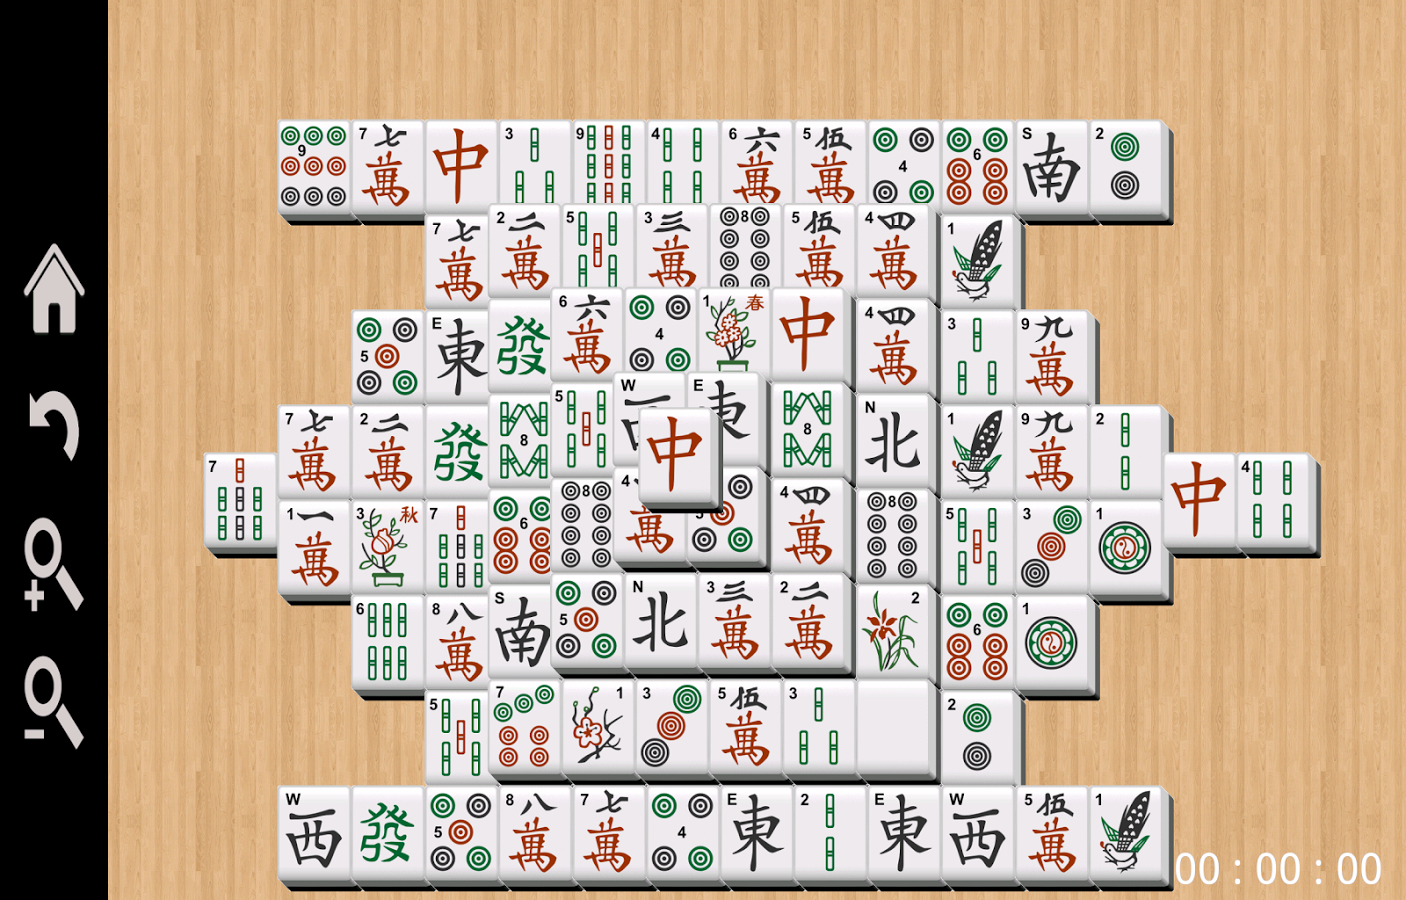 Mahjong or mah-jongg is a tile-based game that was developed in the 19th century in China and has spread throughout the world since the early 20th century. It is commonly played by four players.